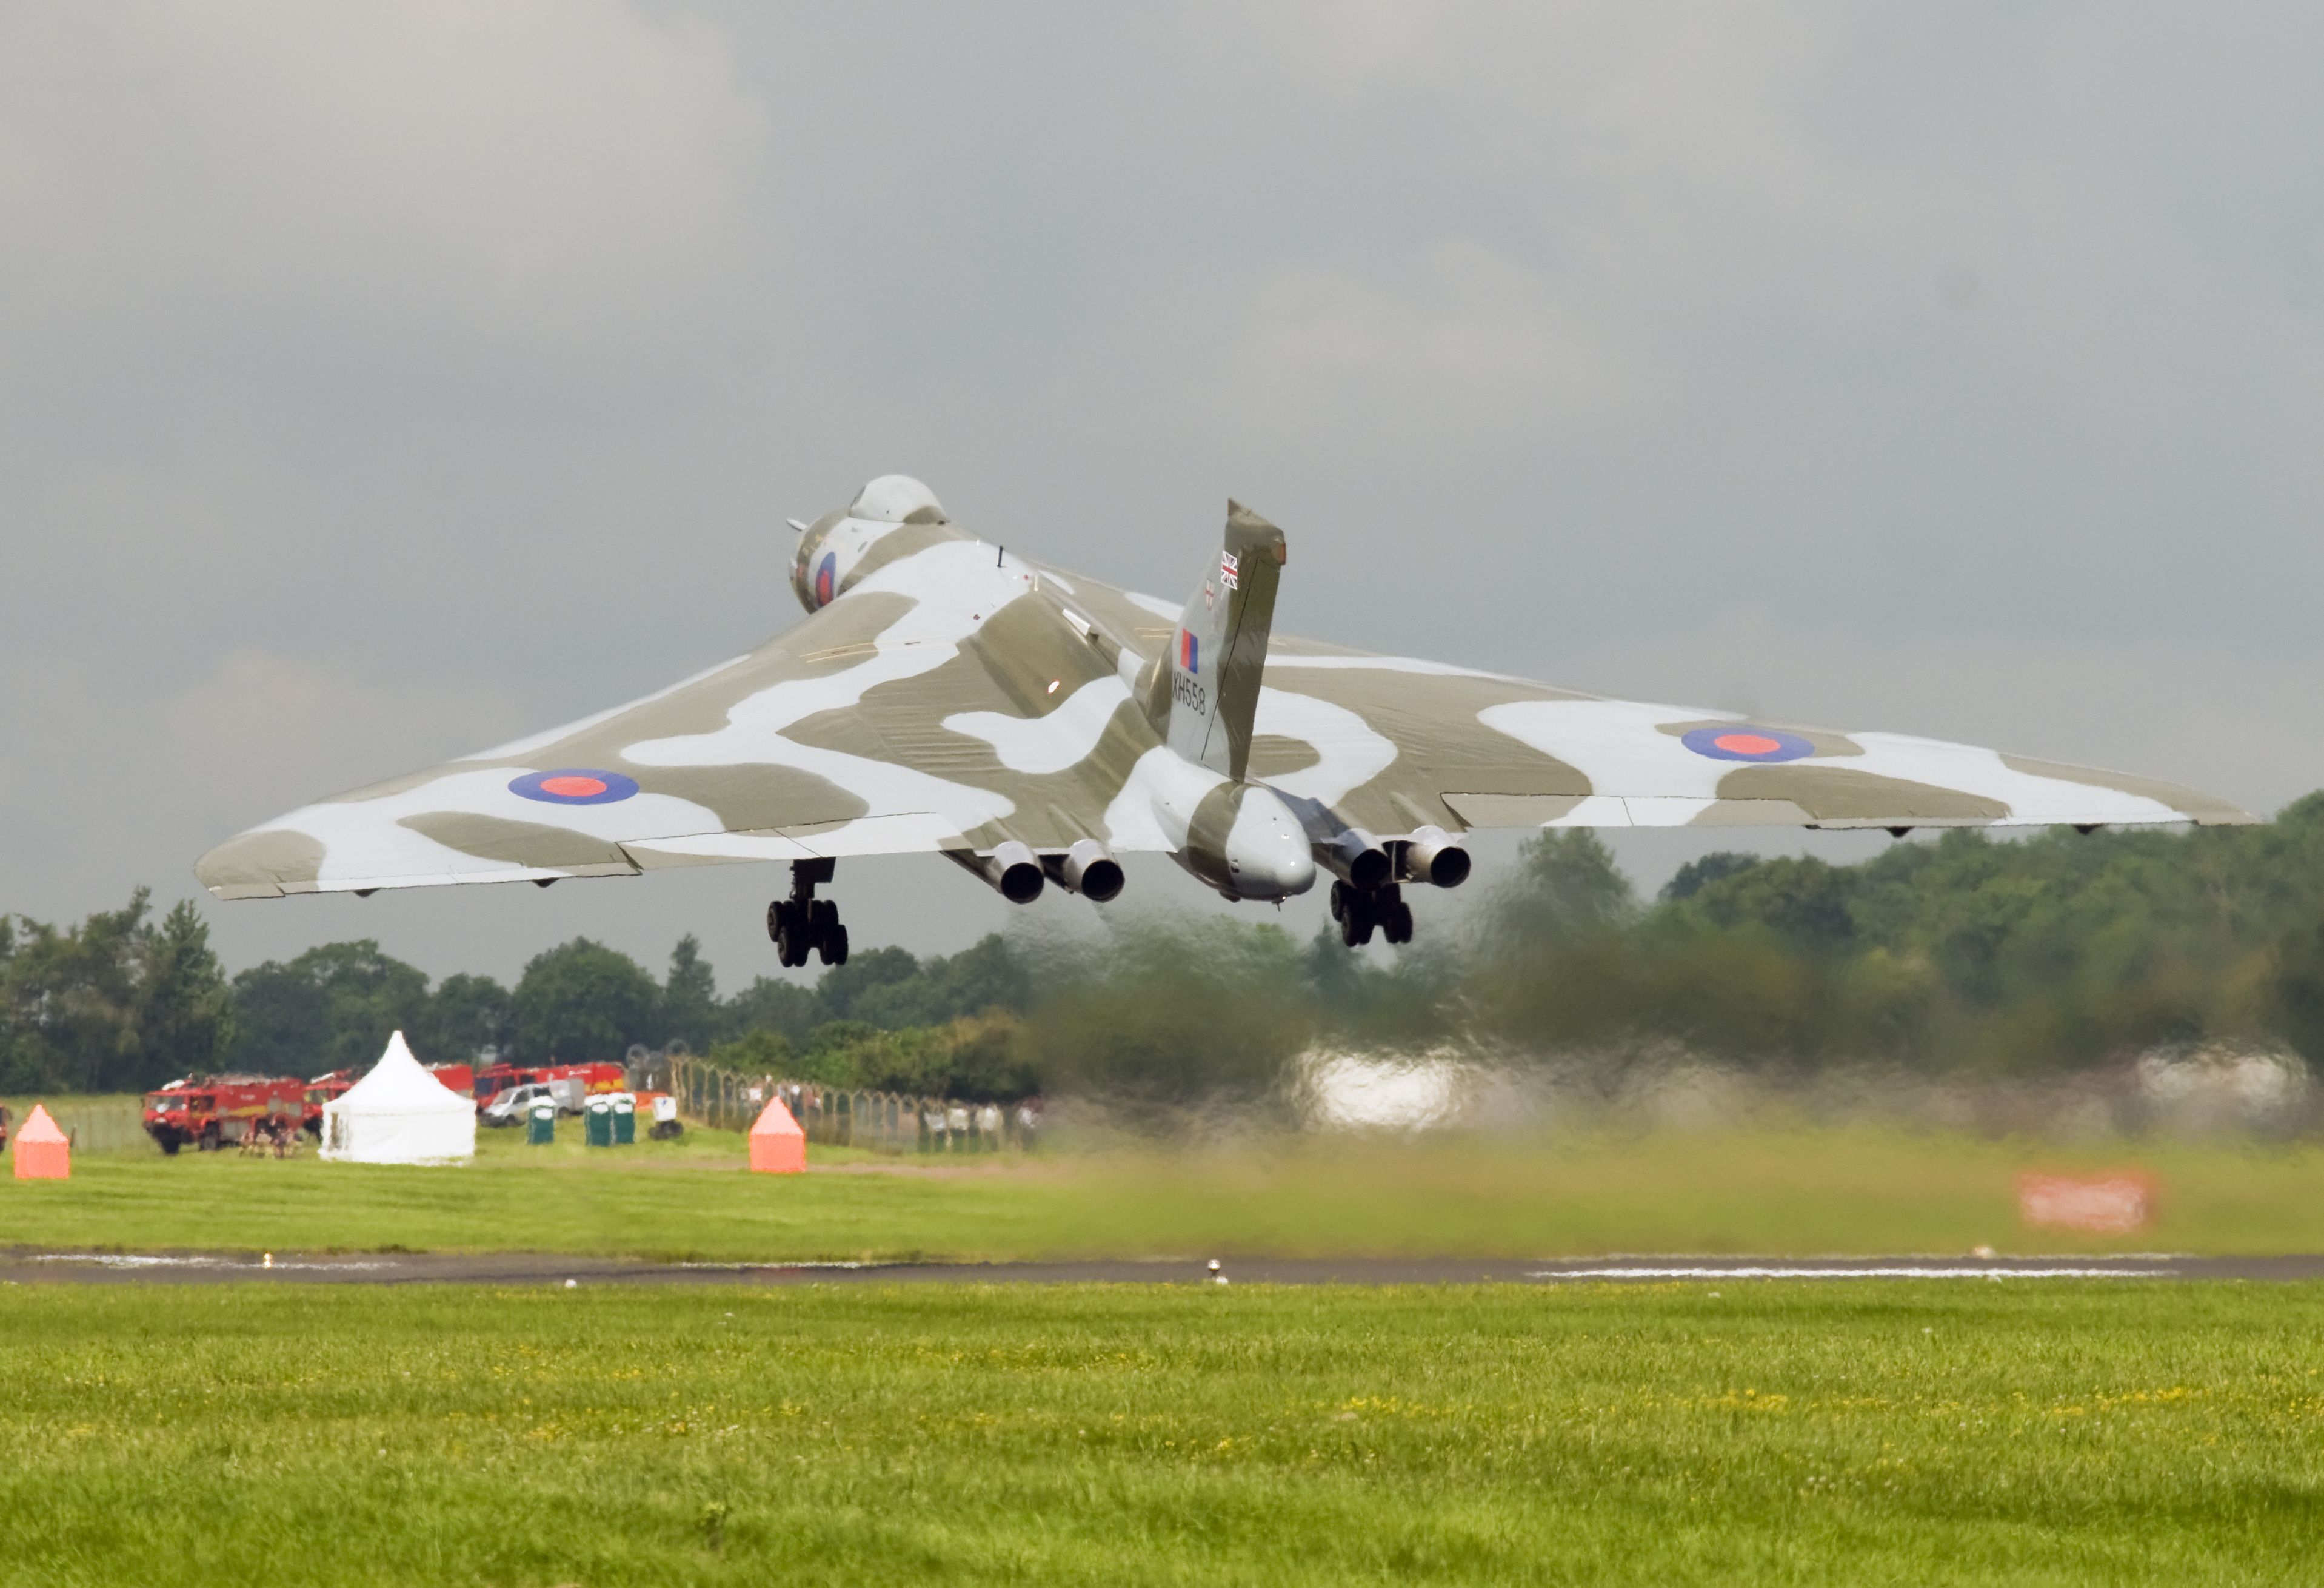 An Avro Vulcan bomber just after take off.